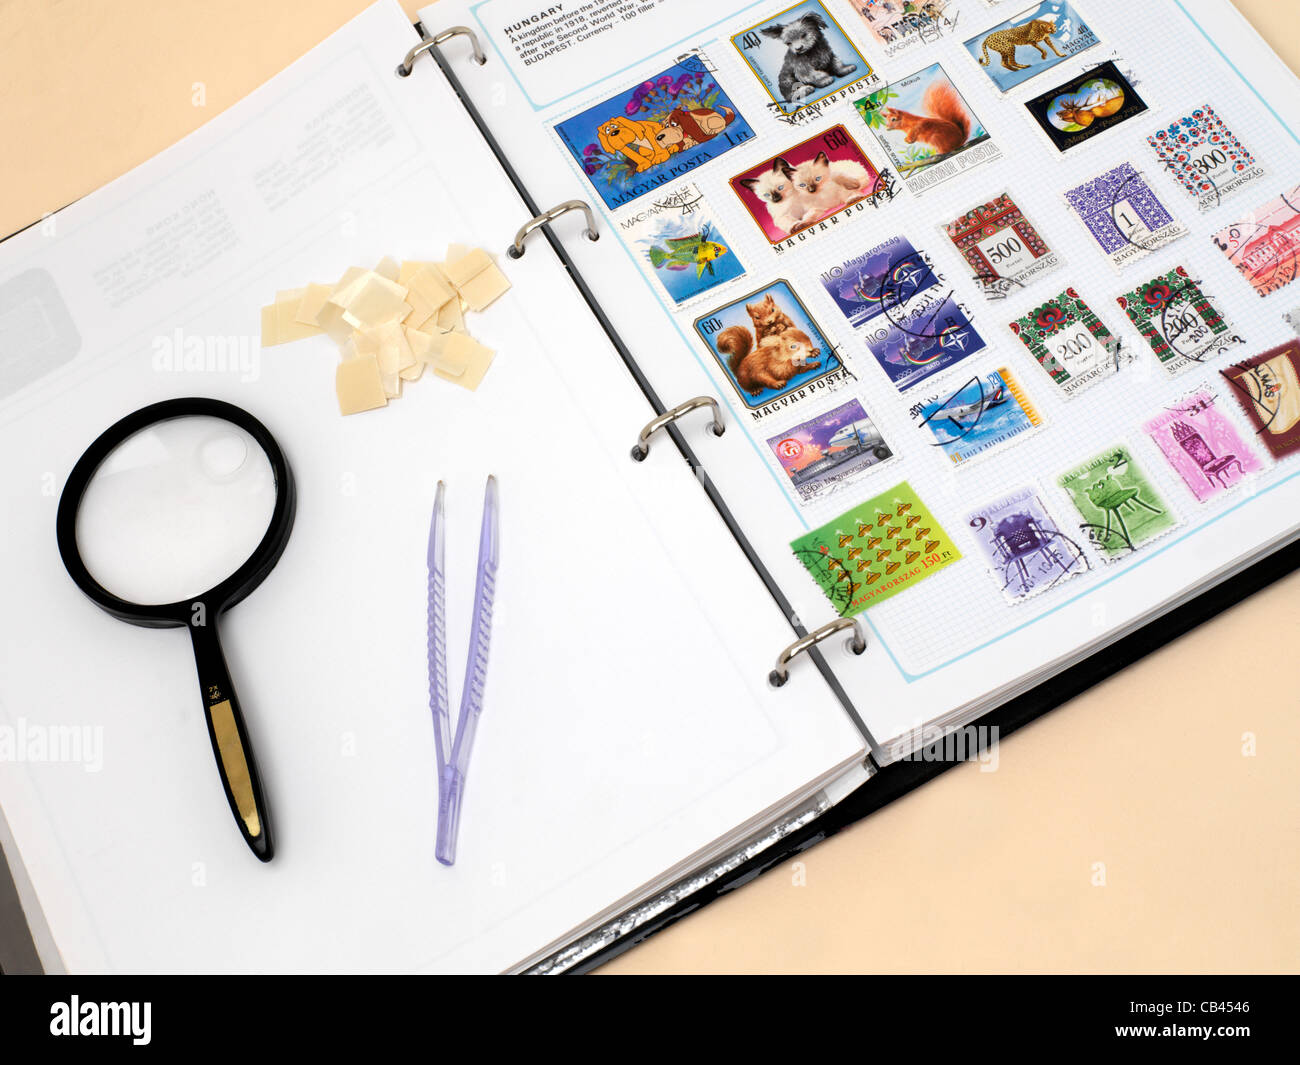 Stamp Album For Collectors: The Ultimate Book for Collecting